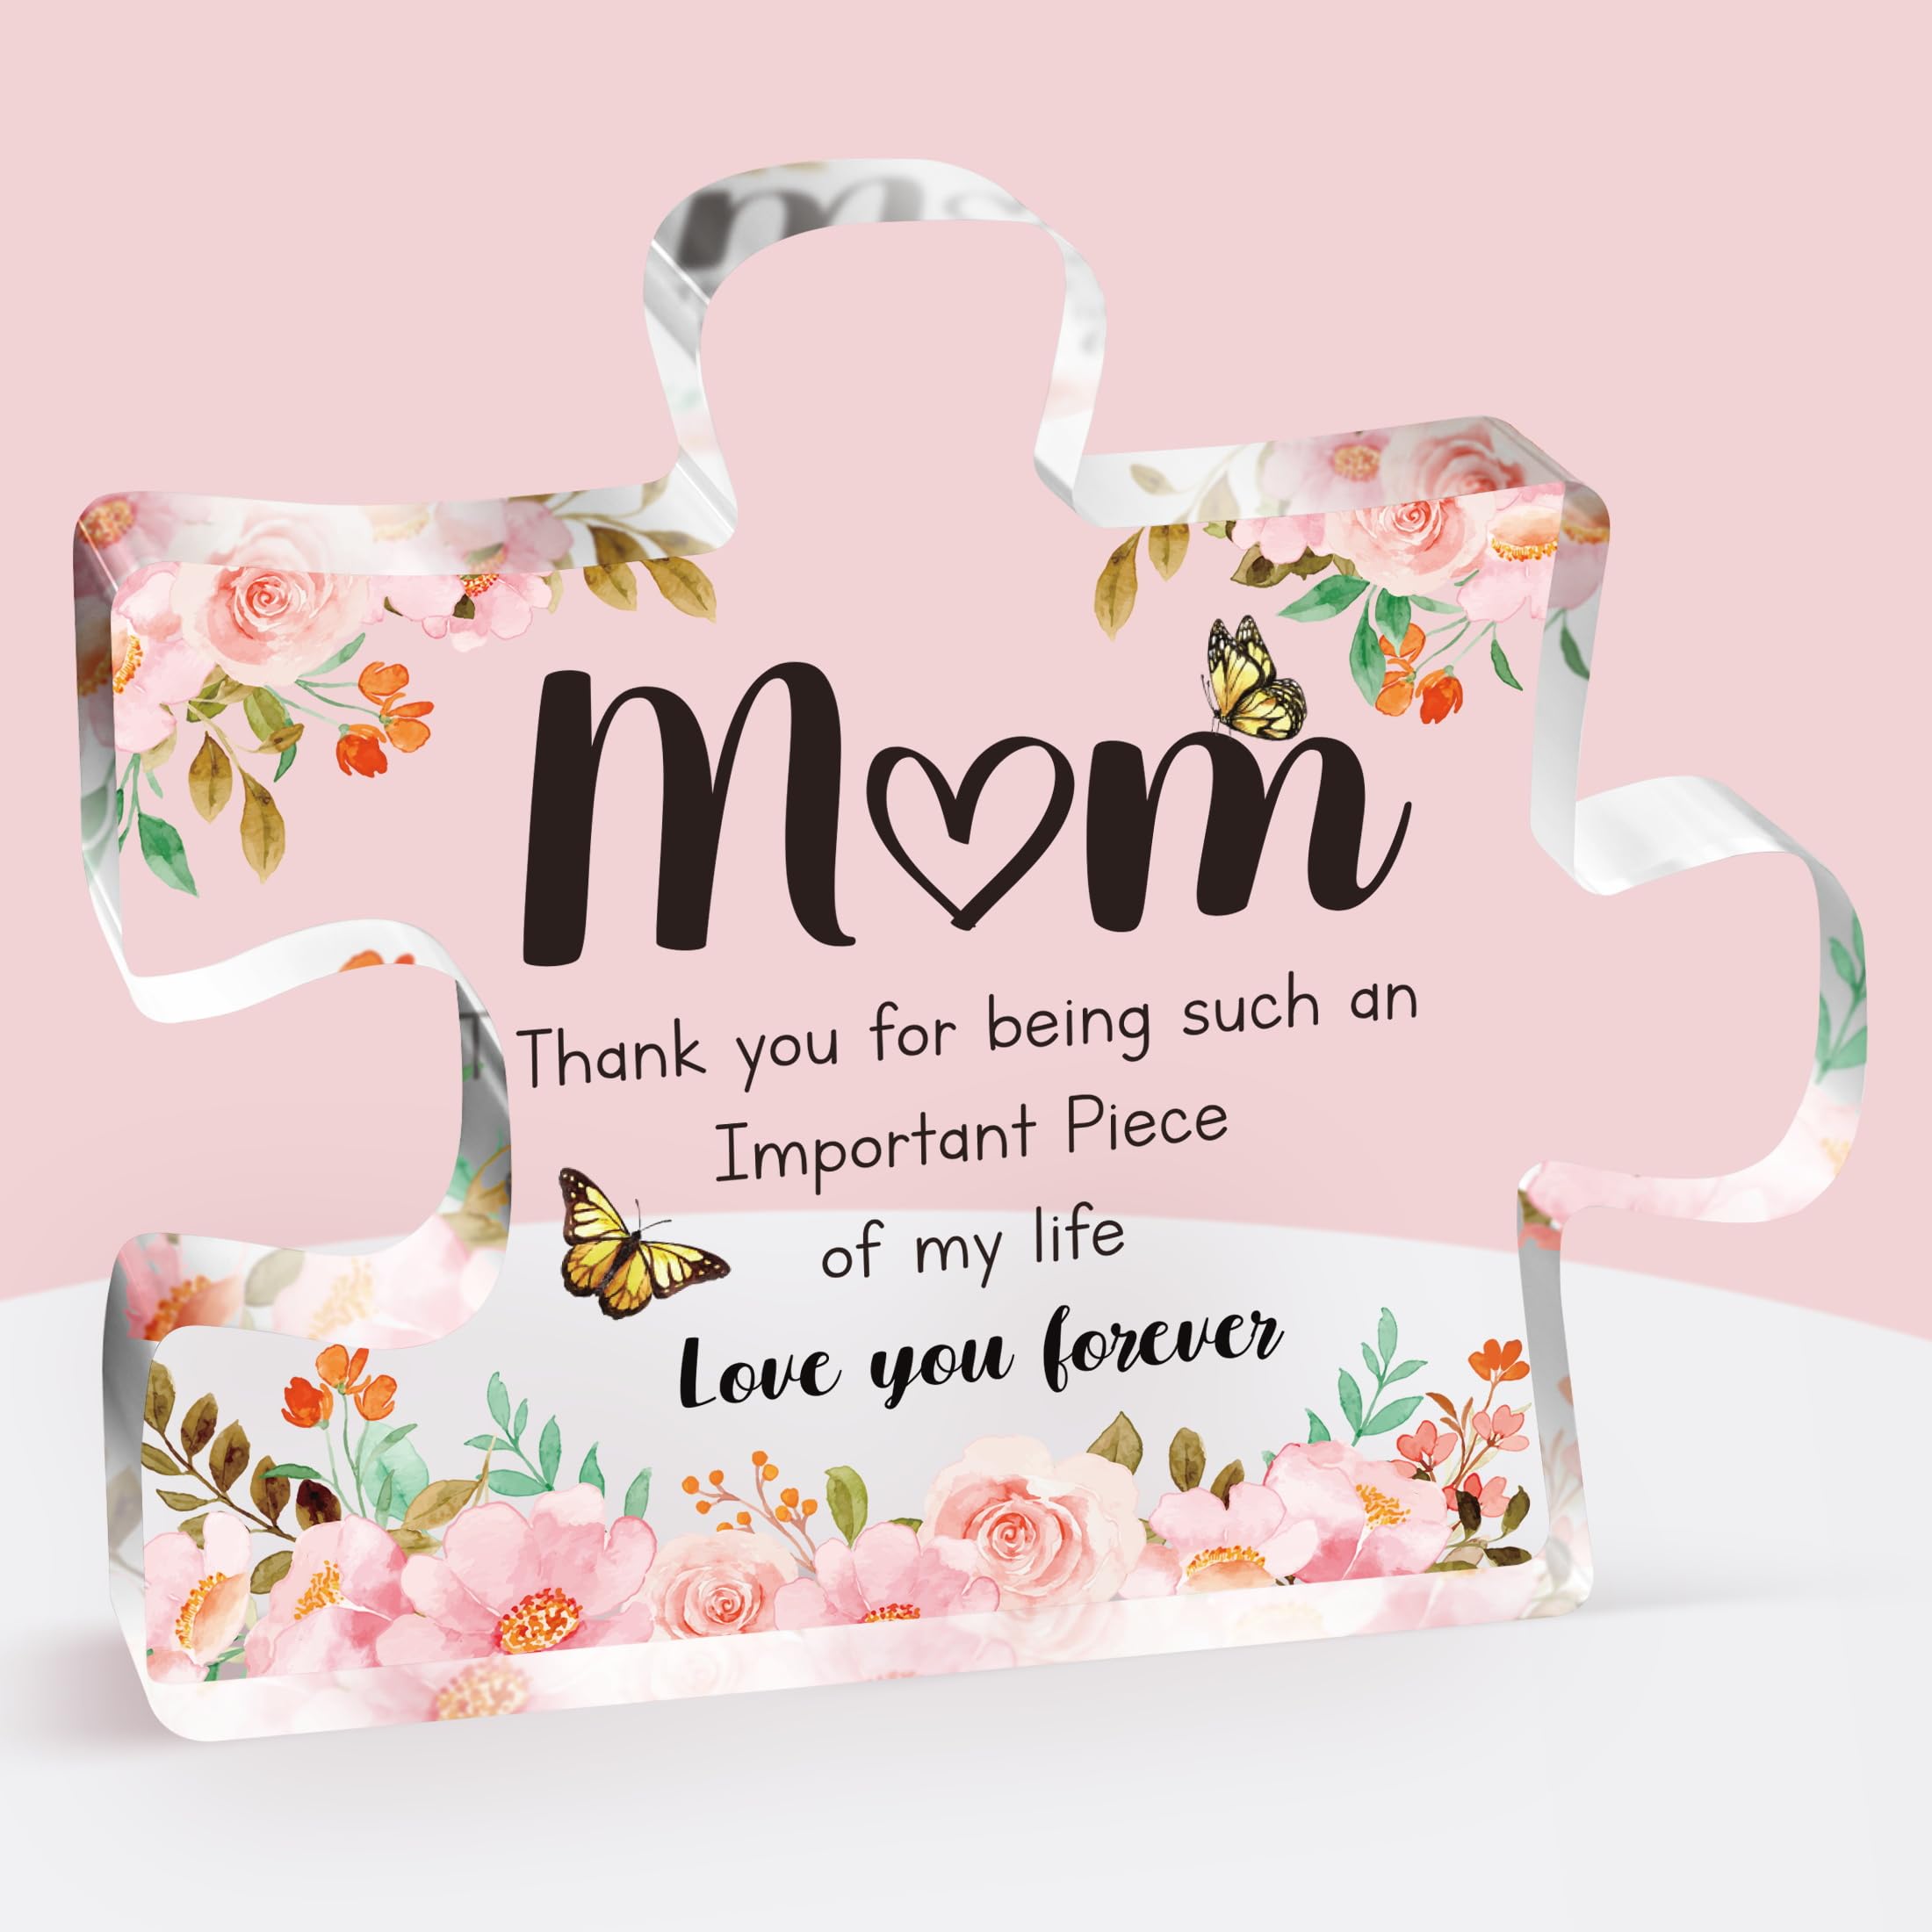 

1pc, Birthday Gifts For Mom, Engraved Acrylic Block Puzzle Plaque Decorations 3.9 X 3.3 Inch Delicate Mom Birthday Gifts From Daughter Son, Christmas Anniversary Birthday Gifts For Mom, Ideas